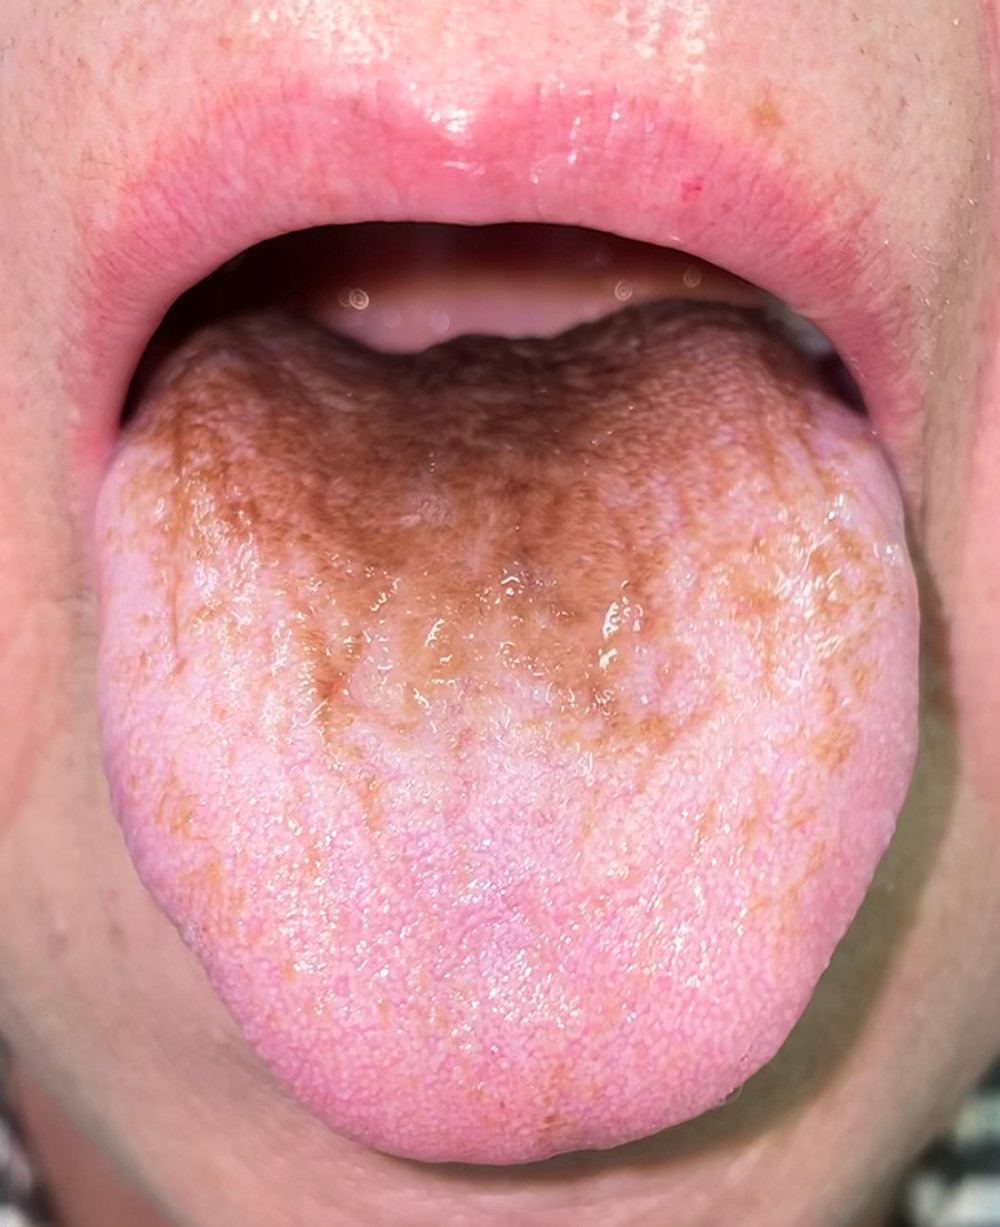 After starting moxifloxacin, the patient developed brown discoloration on the dorsum of the tongue with carpet-like elongated filiform lingual papillae.